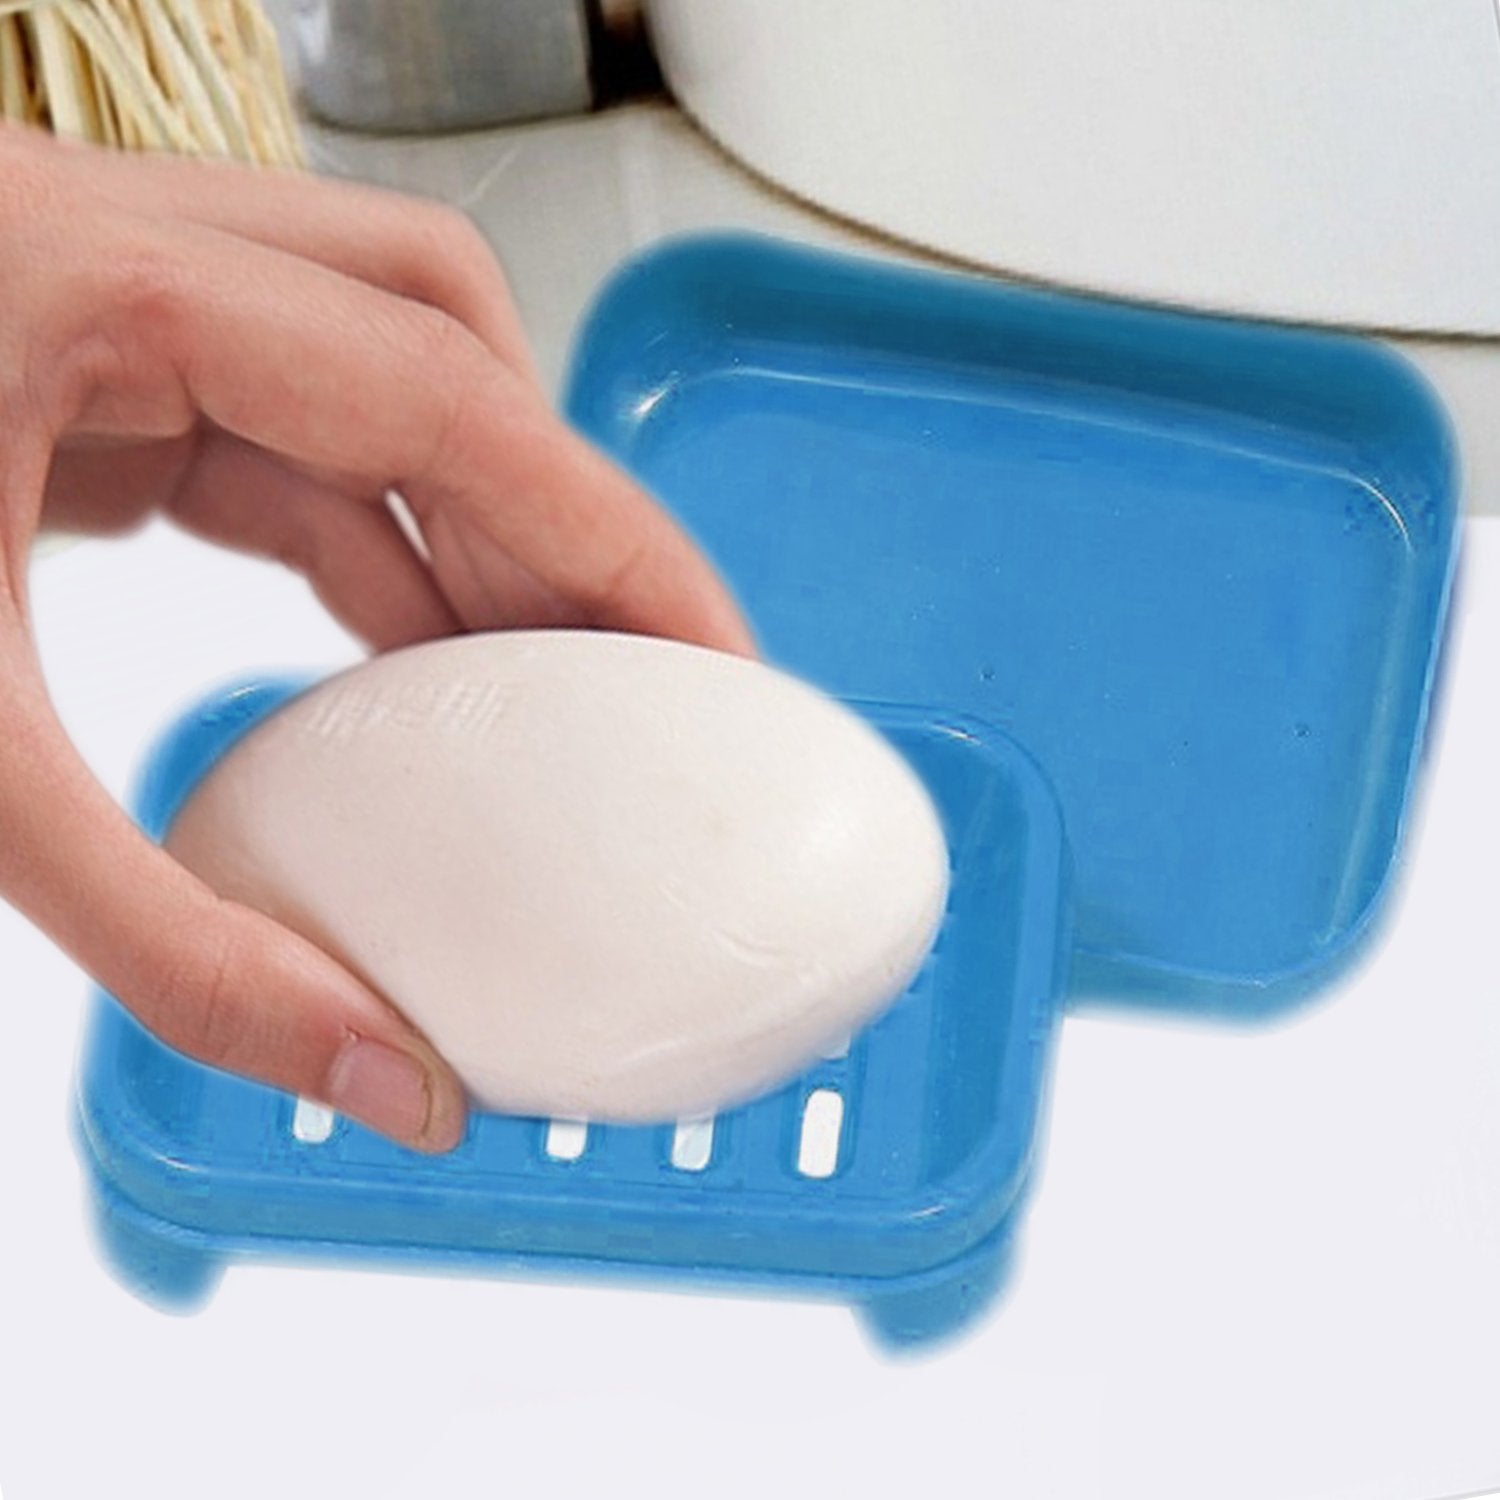 1128 Covered Soap keeping Plastic Case for Bathroom use - SkyShopy